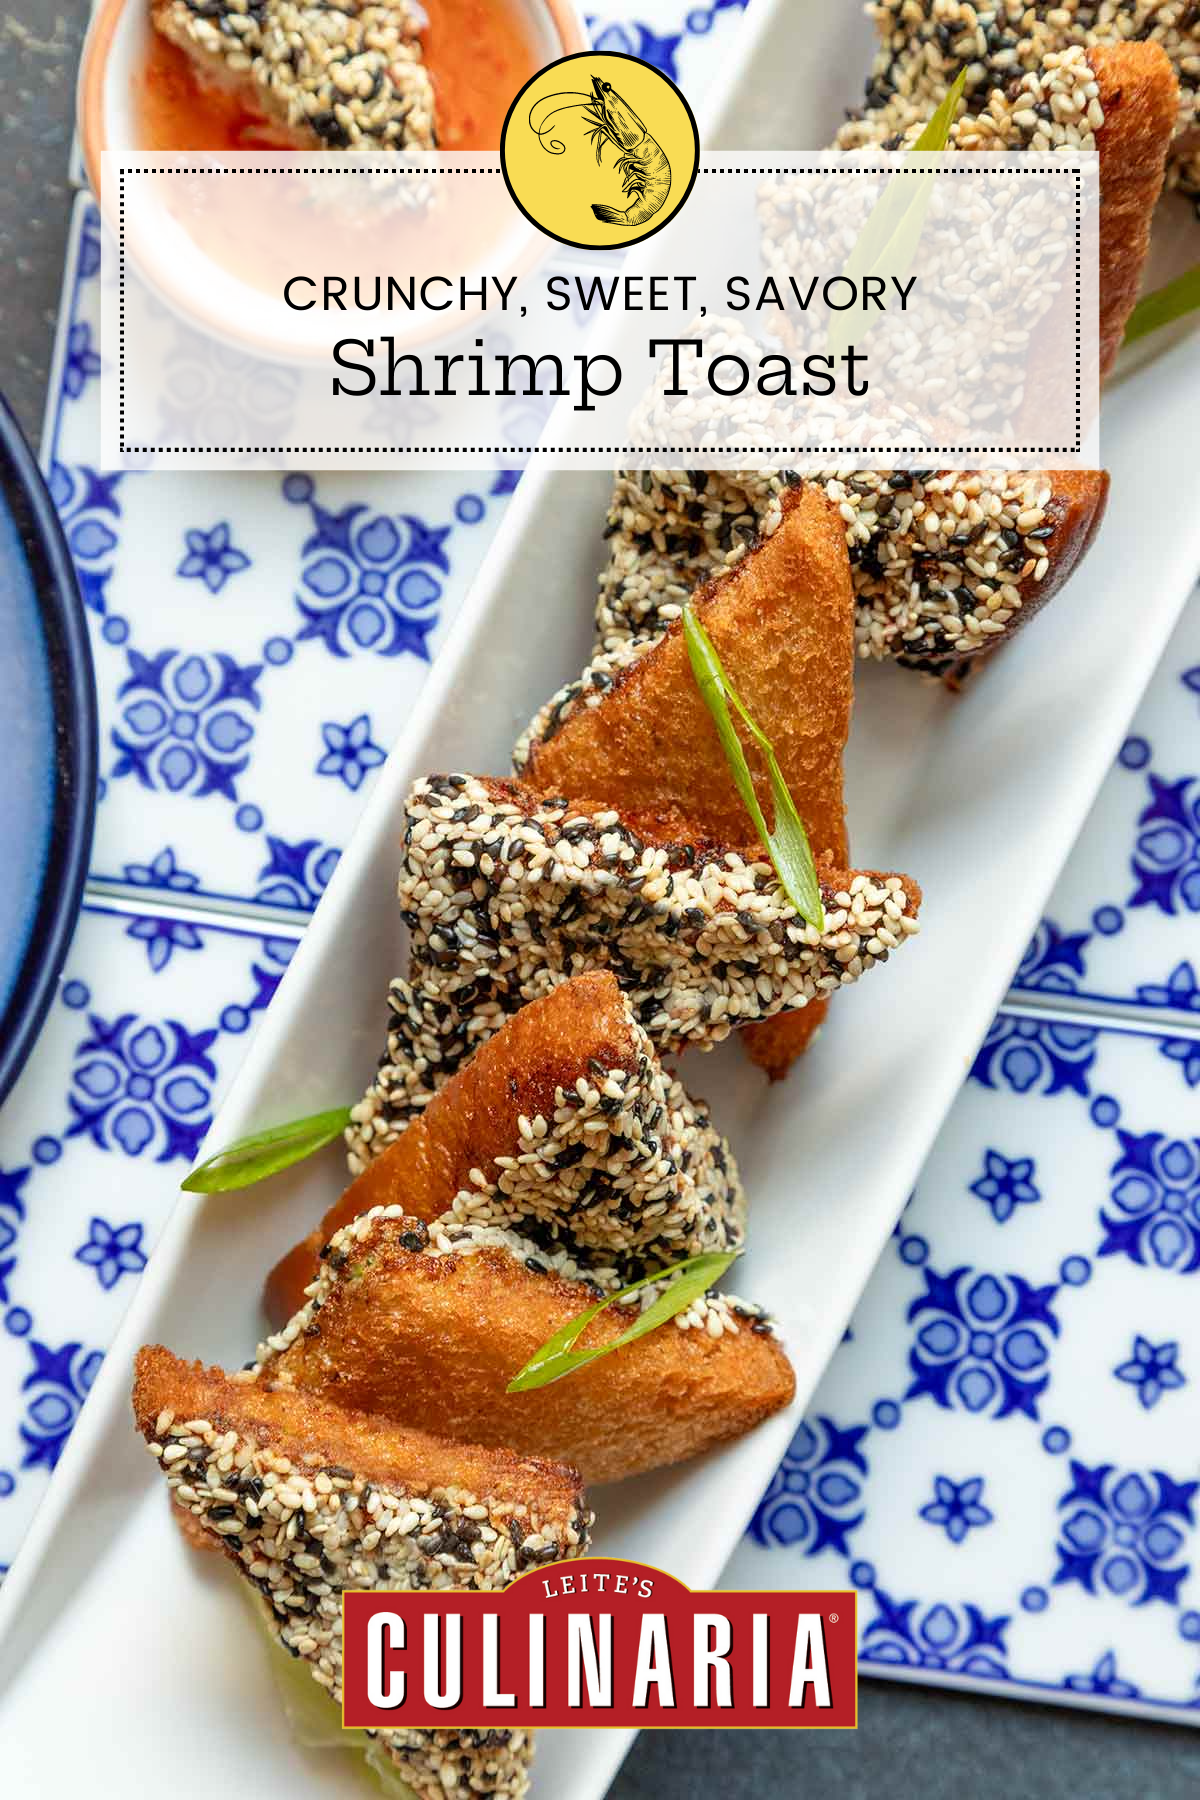 A rectangular platter of shrimp toast on top of blue and white tiles.